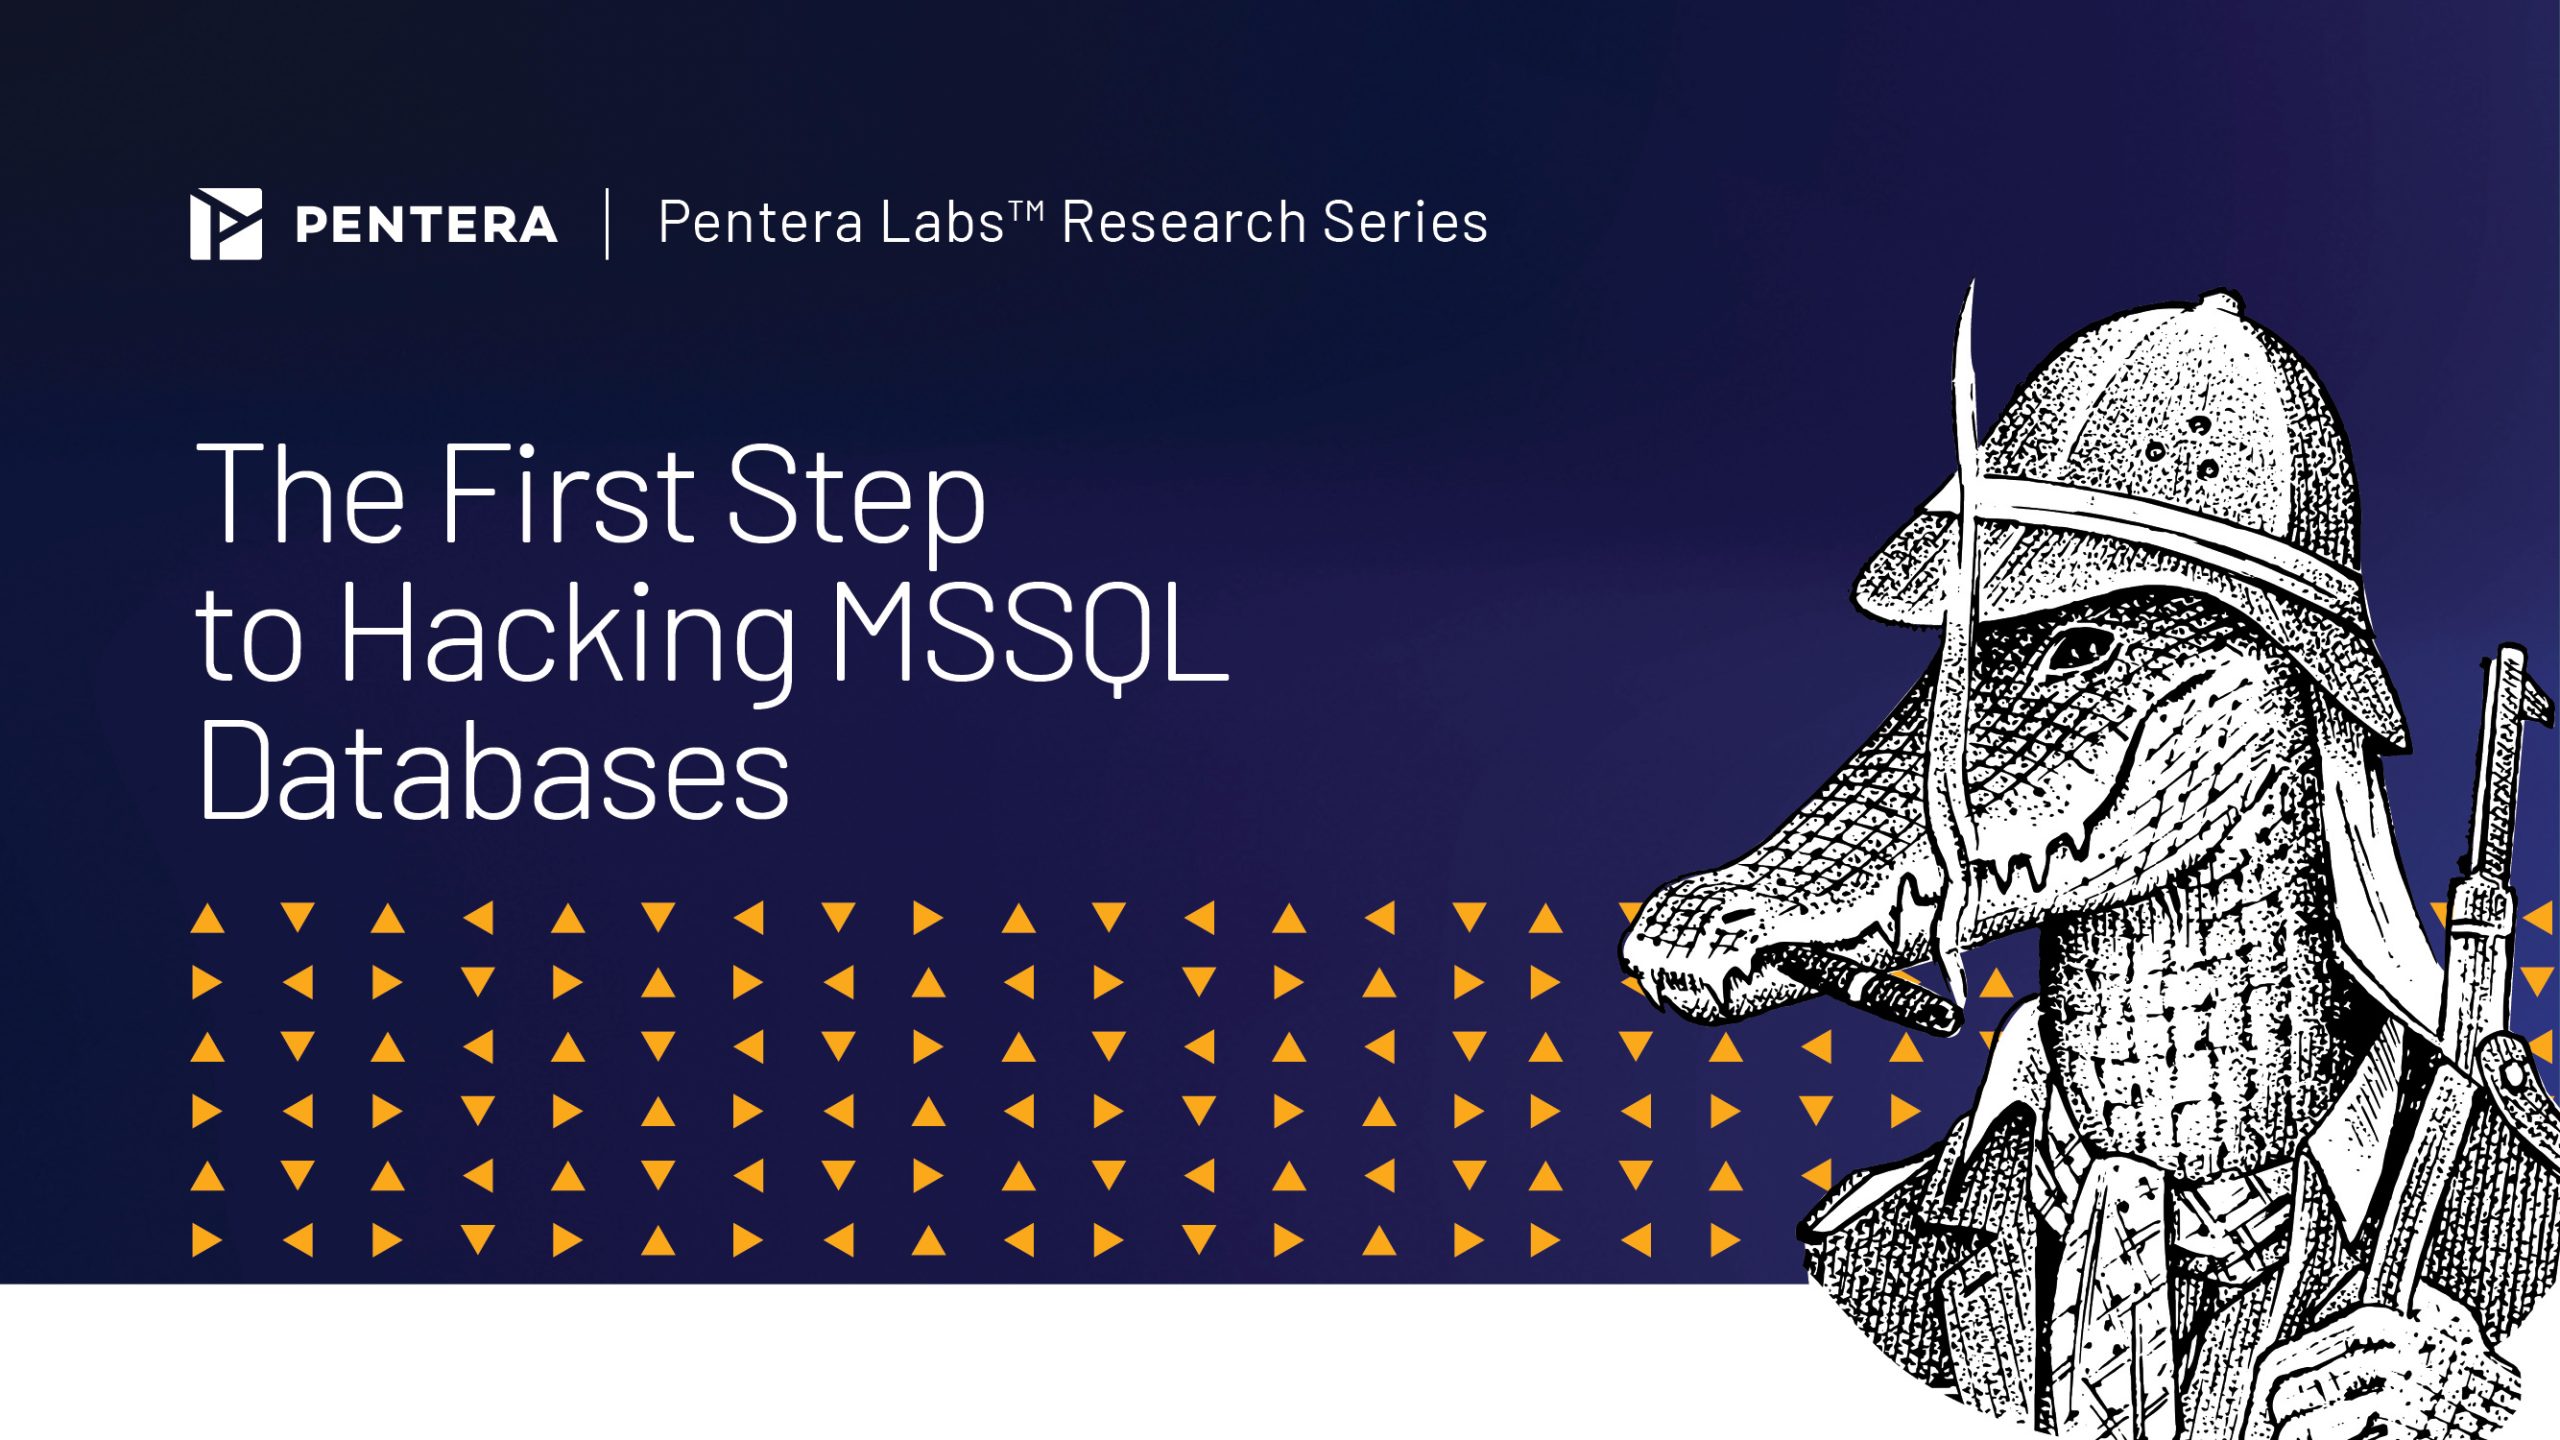 The first step to hacking MSSQL databases